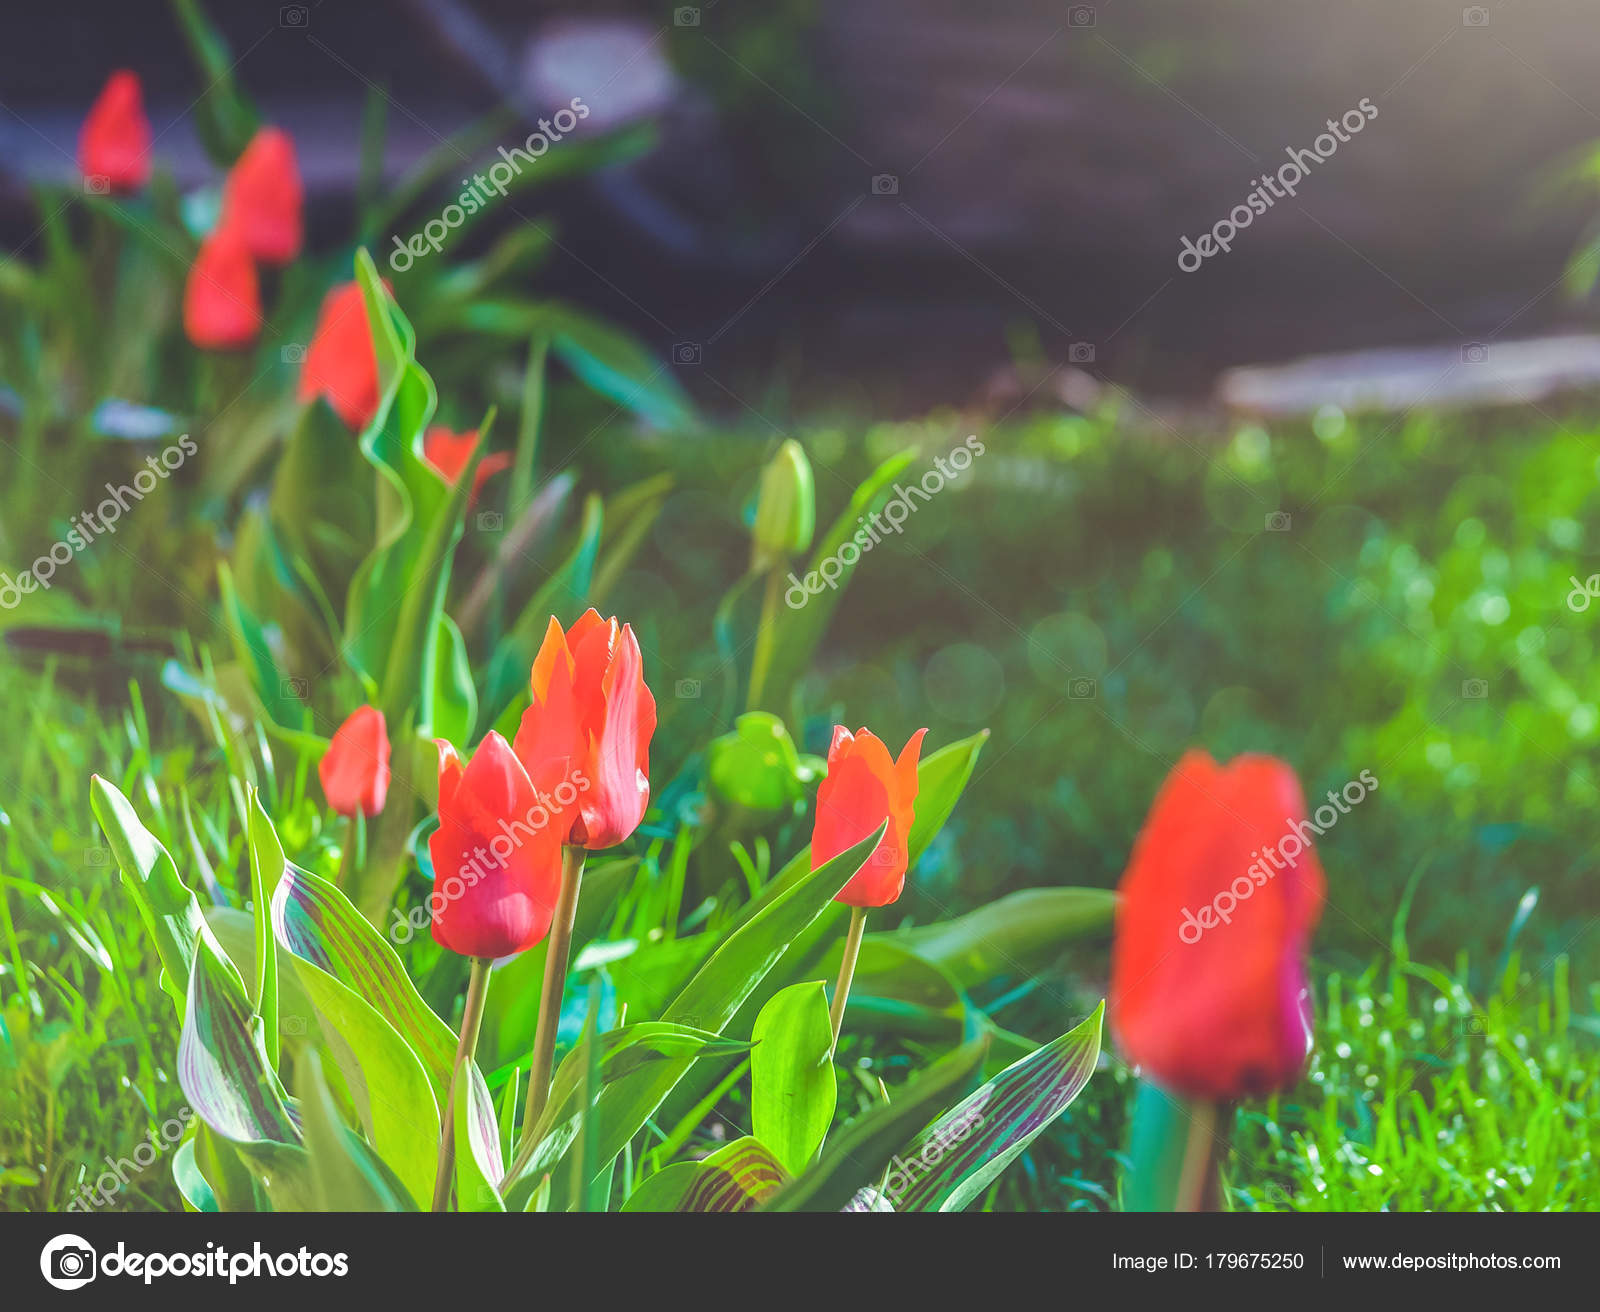 Red Tulips Blooming Flowers Field Green Grass Lawn Beautiful Spring ...